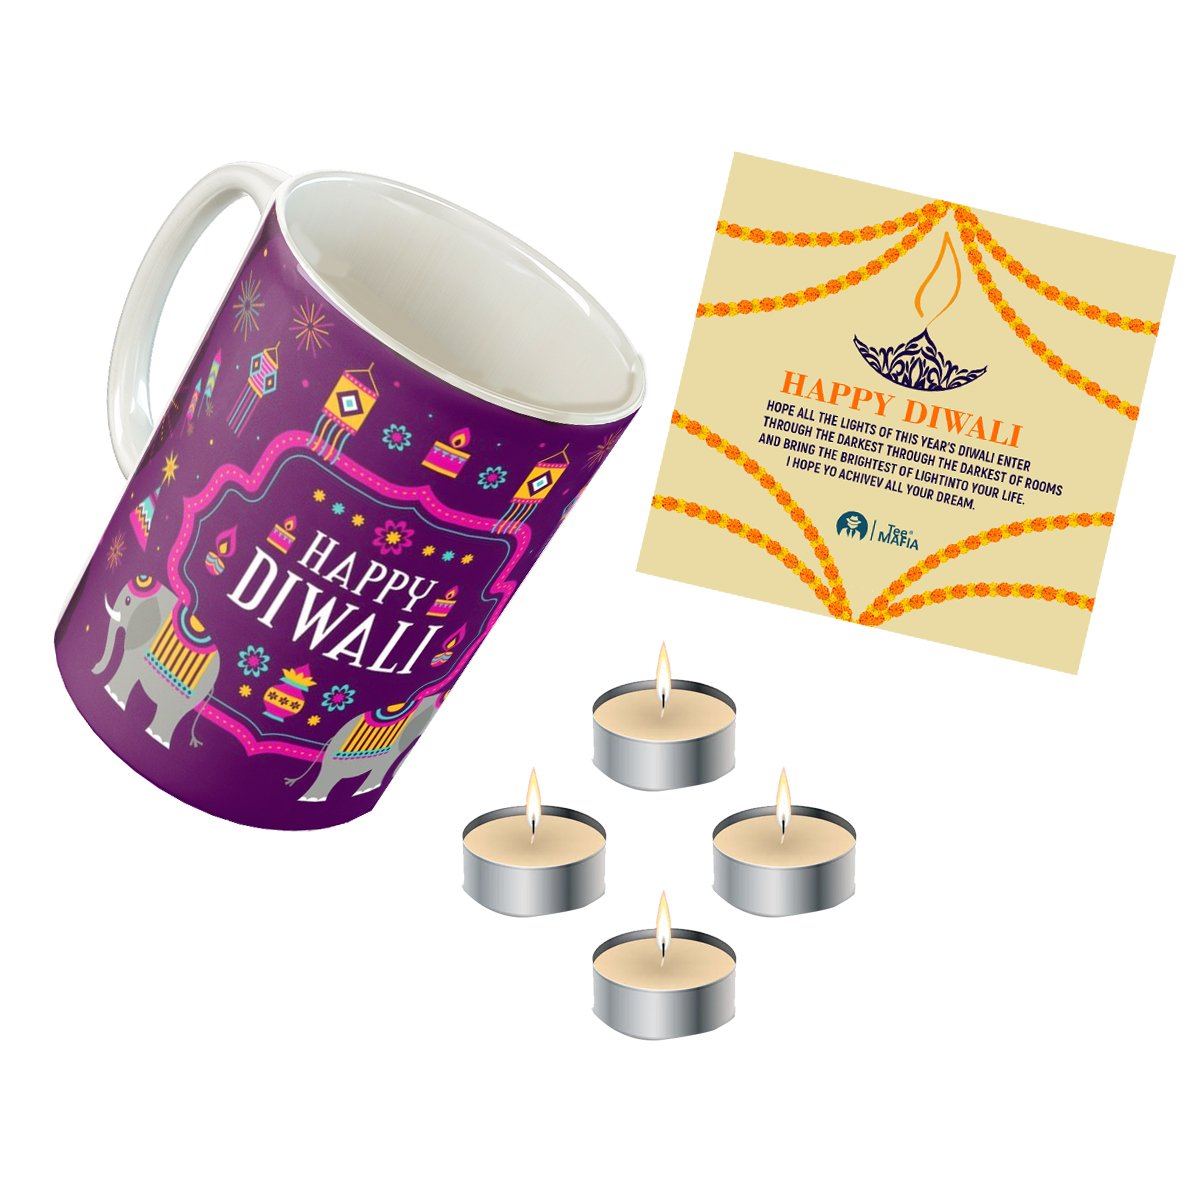 Diwali Gift Hamper Almond with Cracker Shape Chocolate Pack for Family,  Friends, Kids, Brother, Sister, Employees, Staff-240 Gram : Amazon.in:  Grocery & Gourmet Foods